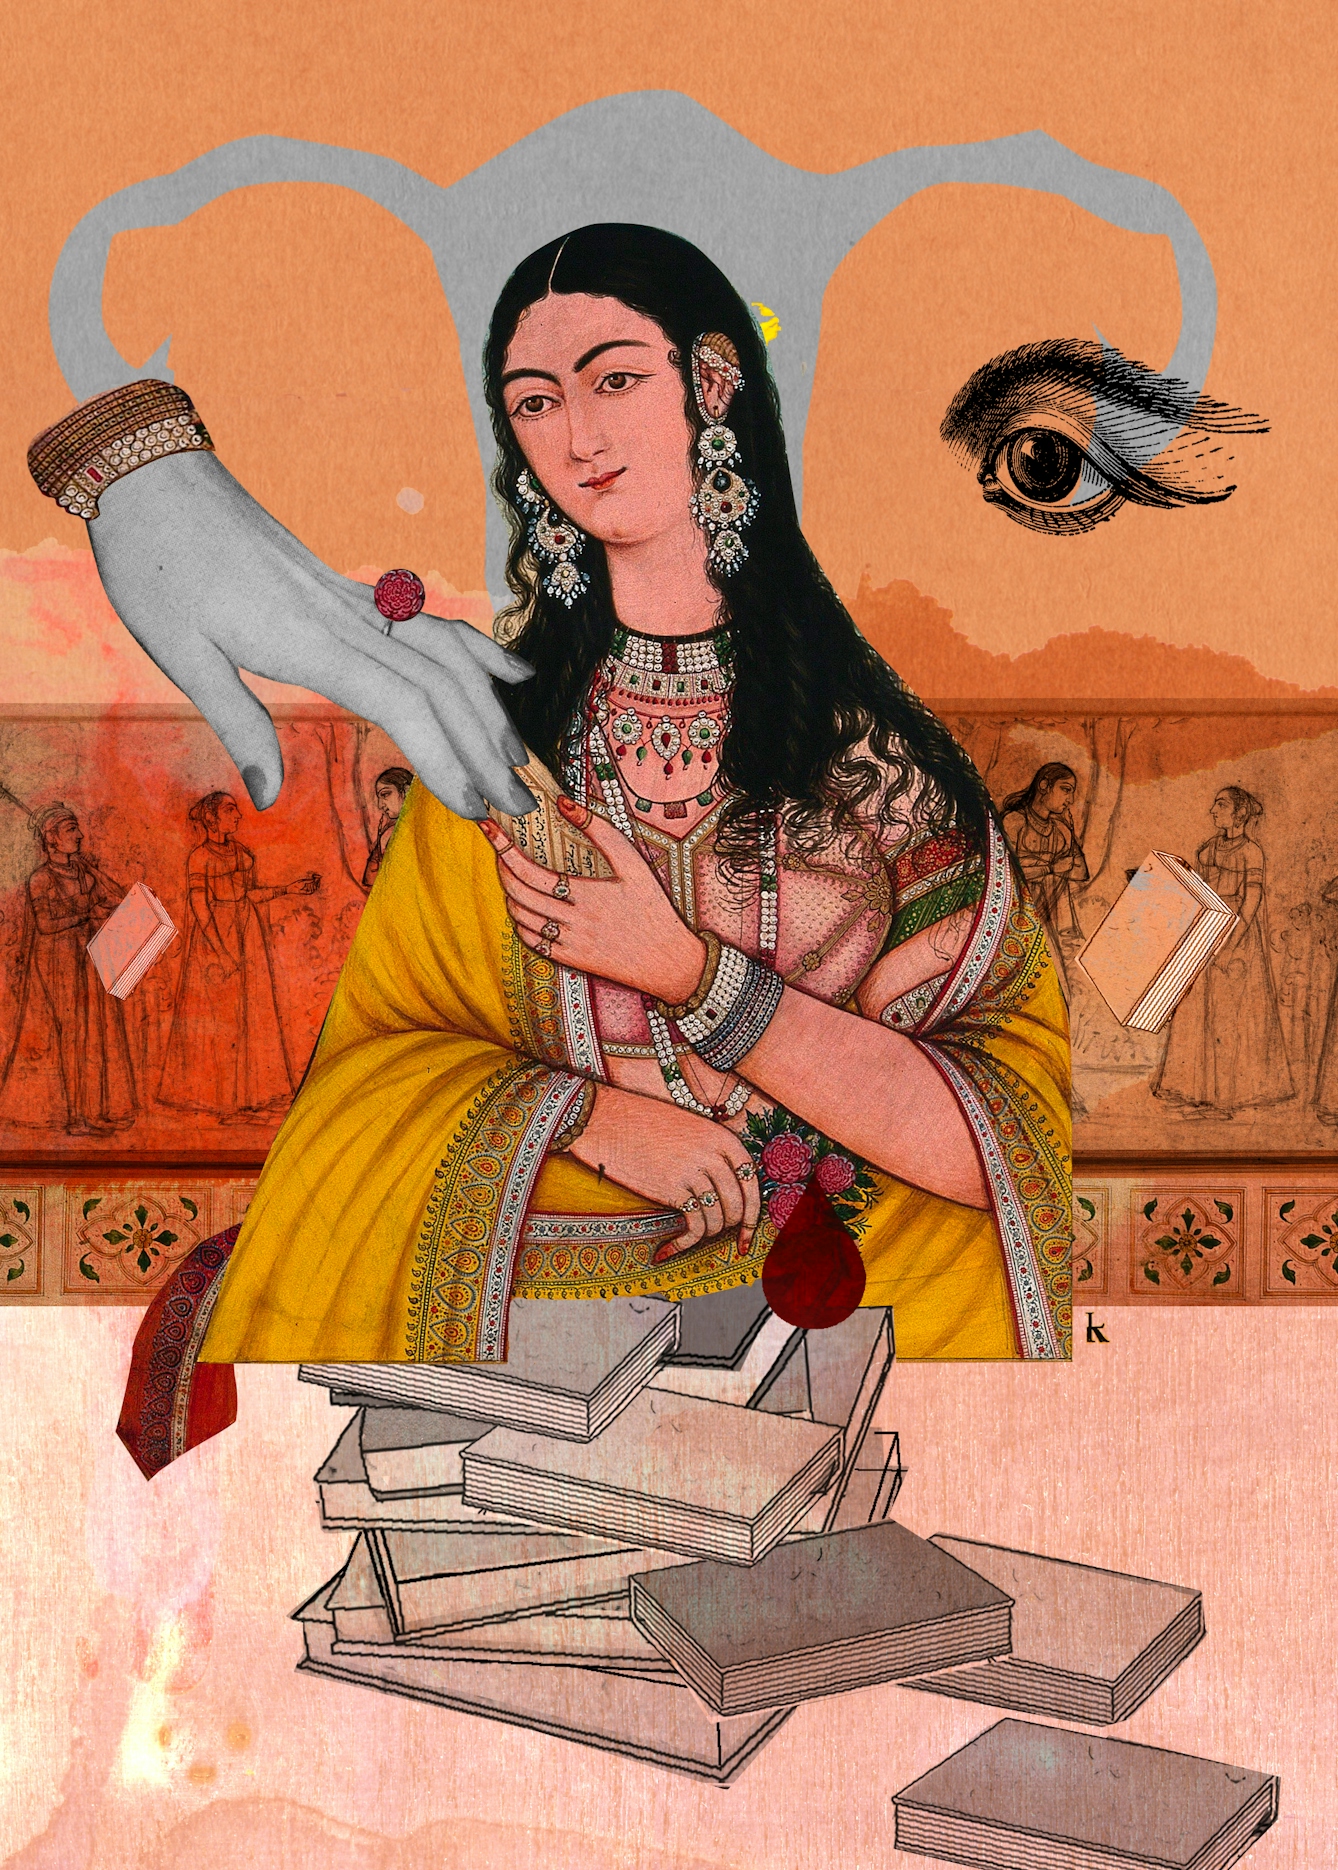 Mixed media digital collage on a pink and orange textured fabric and watercolour background.  A regal South Asian woman is touching fingers with a hand that appears to be coming from the location of the left ovary of female reproductive system.  The right ovary has been replaced with an eye.  Below her are books that symbolise knowledge and education.  